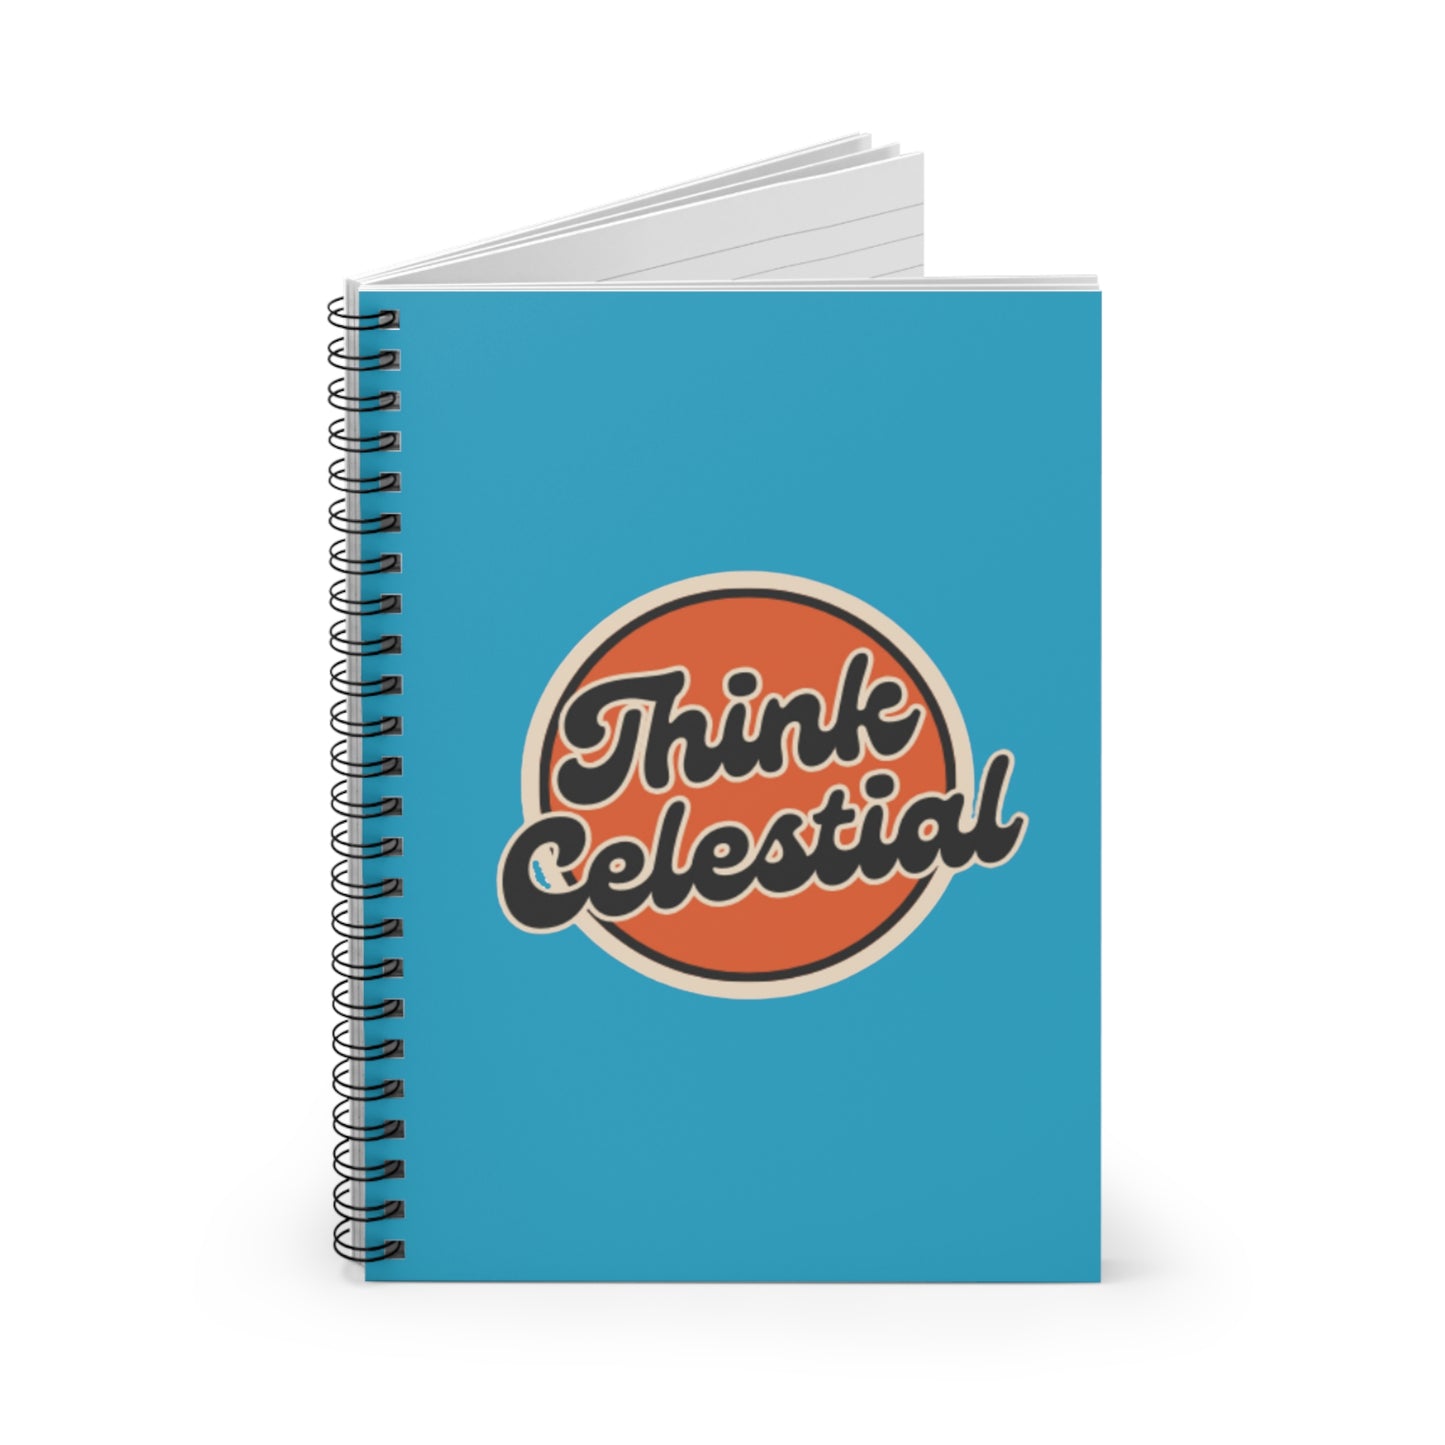 Think Celestial Retro Spiral Notebook - Ruled Line